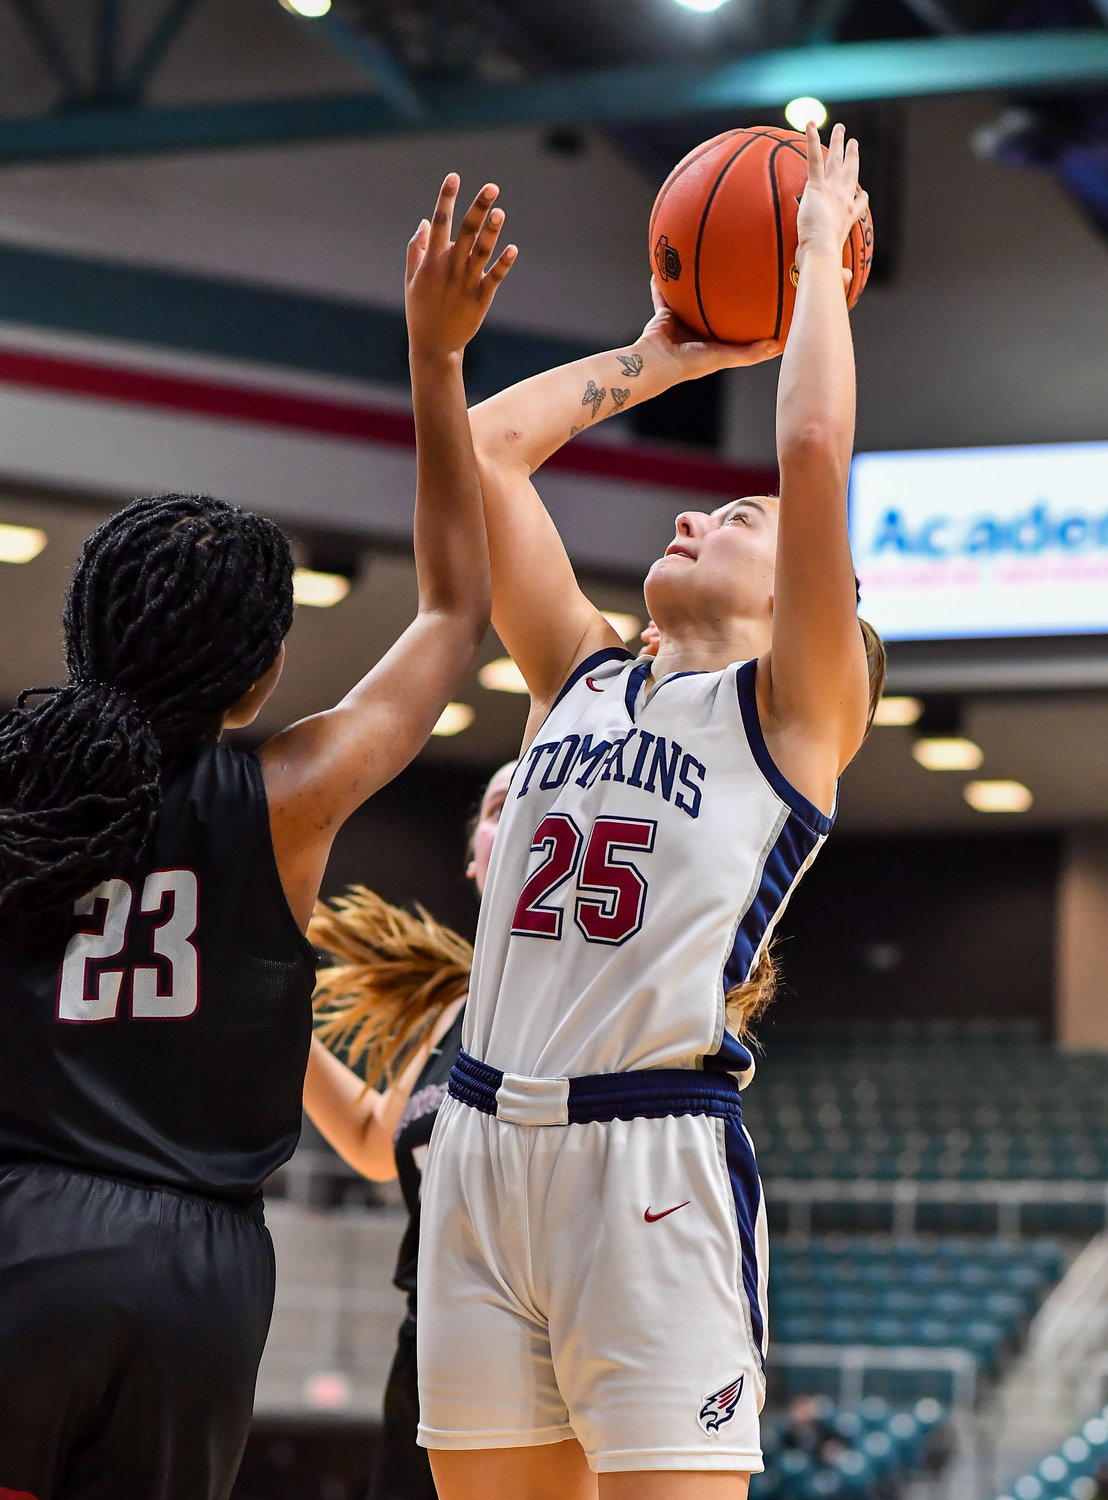 Katy Tx. Feb 15, 2022:  Tompkins Kennedy Bourque #25 goes up for the shot during the Bi-District playoff, Tompkins vs George Ranch. (Photo by Mark Goodman / Katy Times)